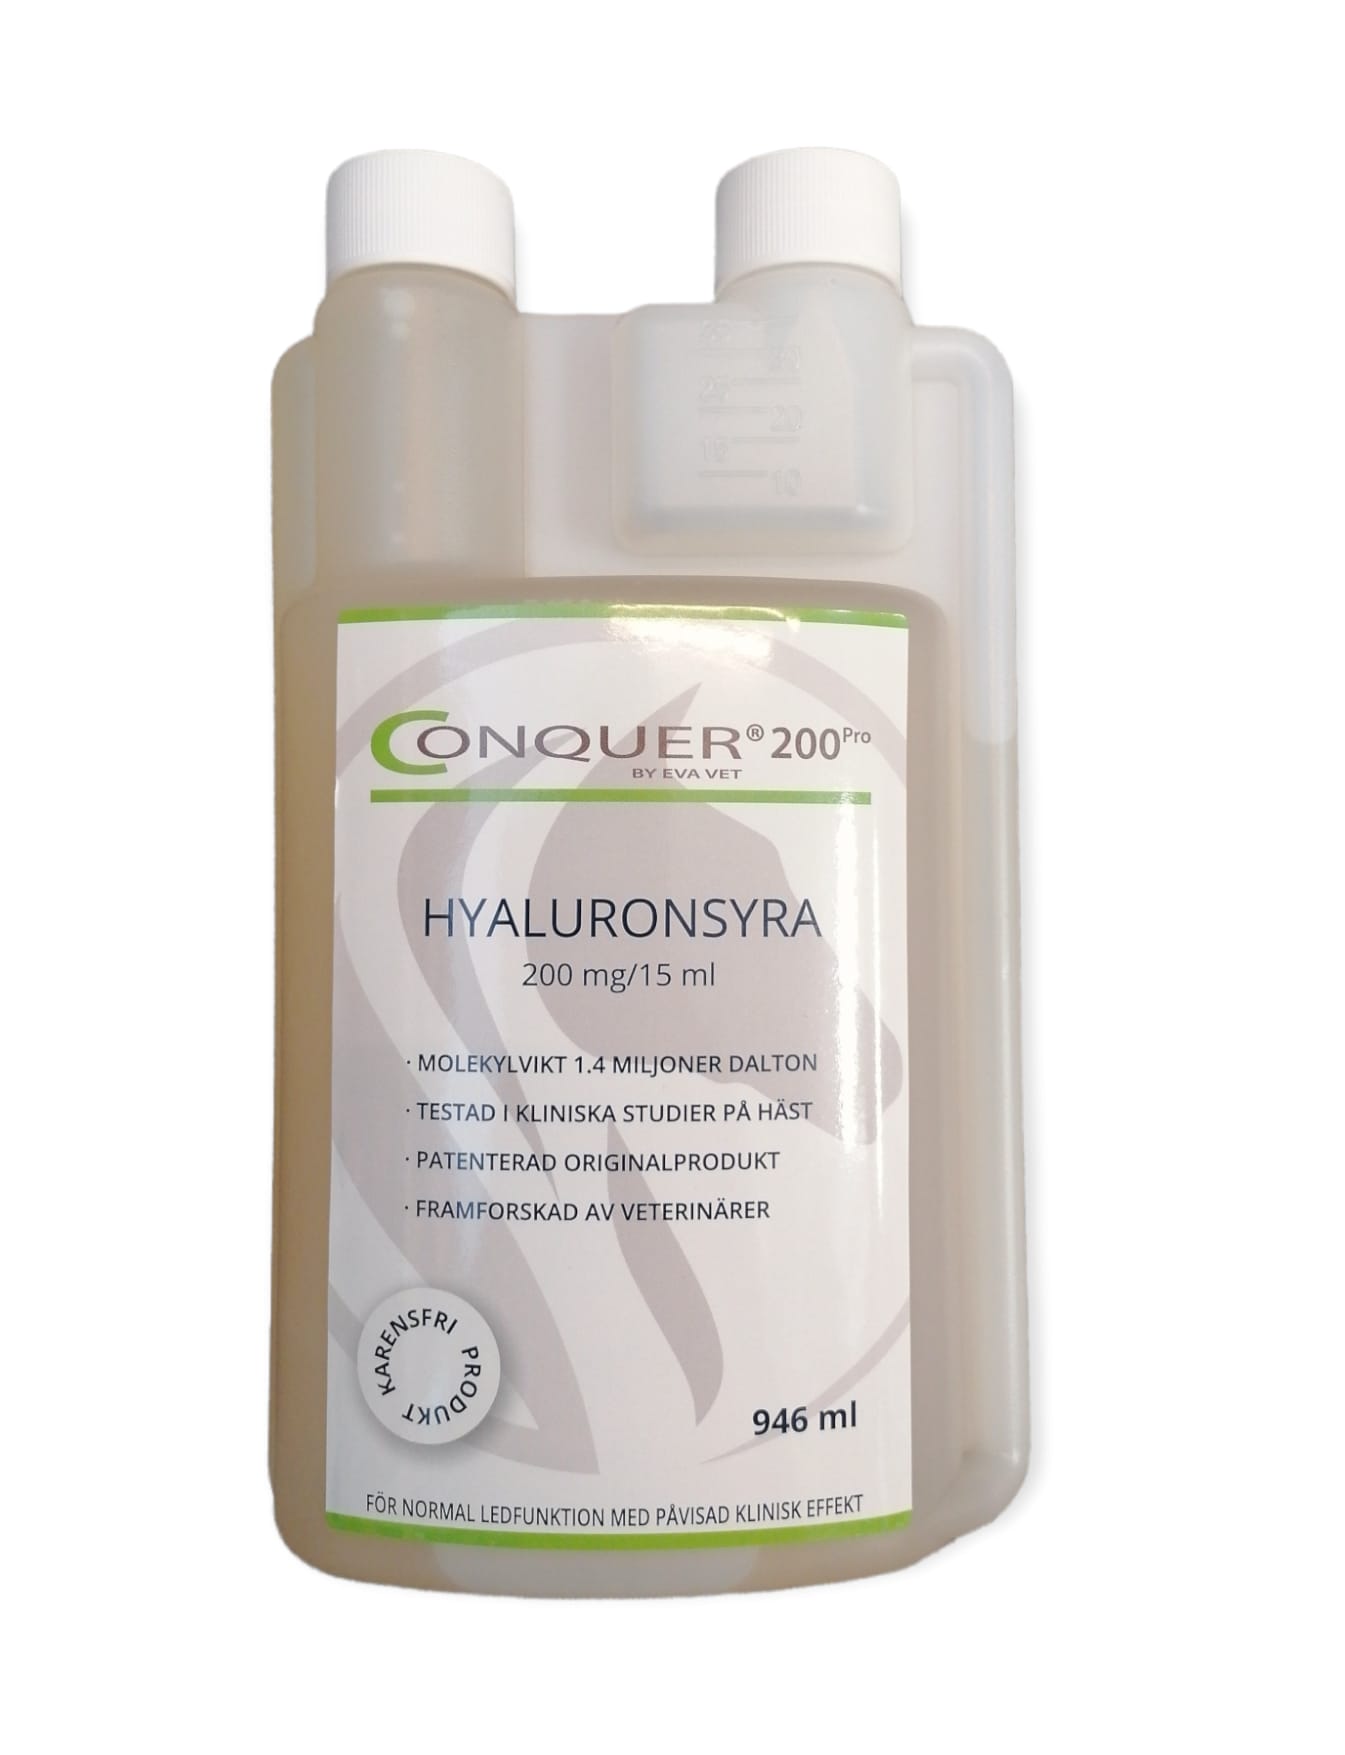 Conquer, Hyaluronsäure - 946 ml